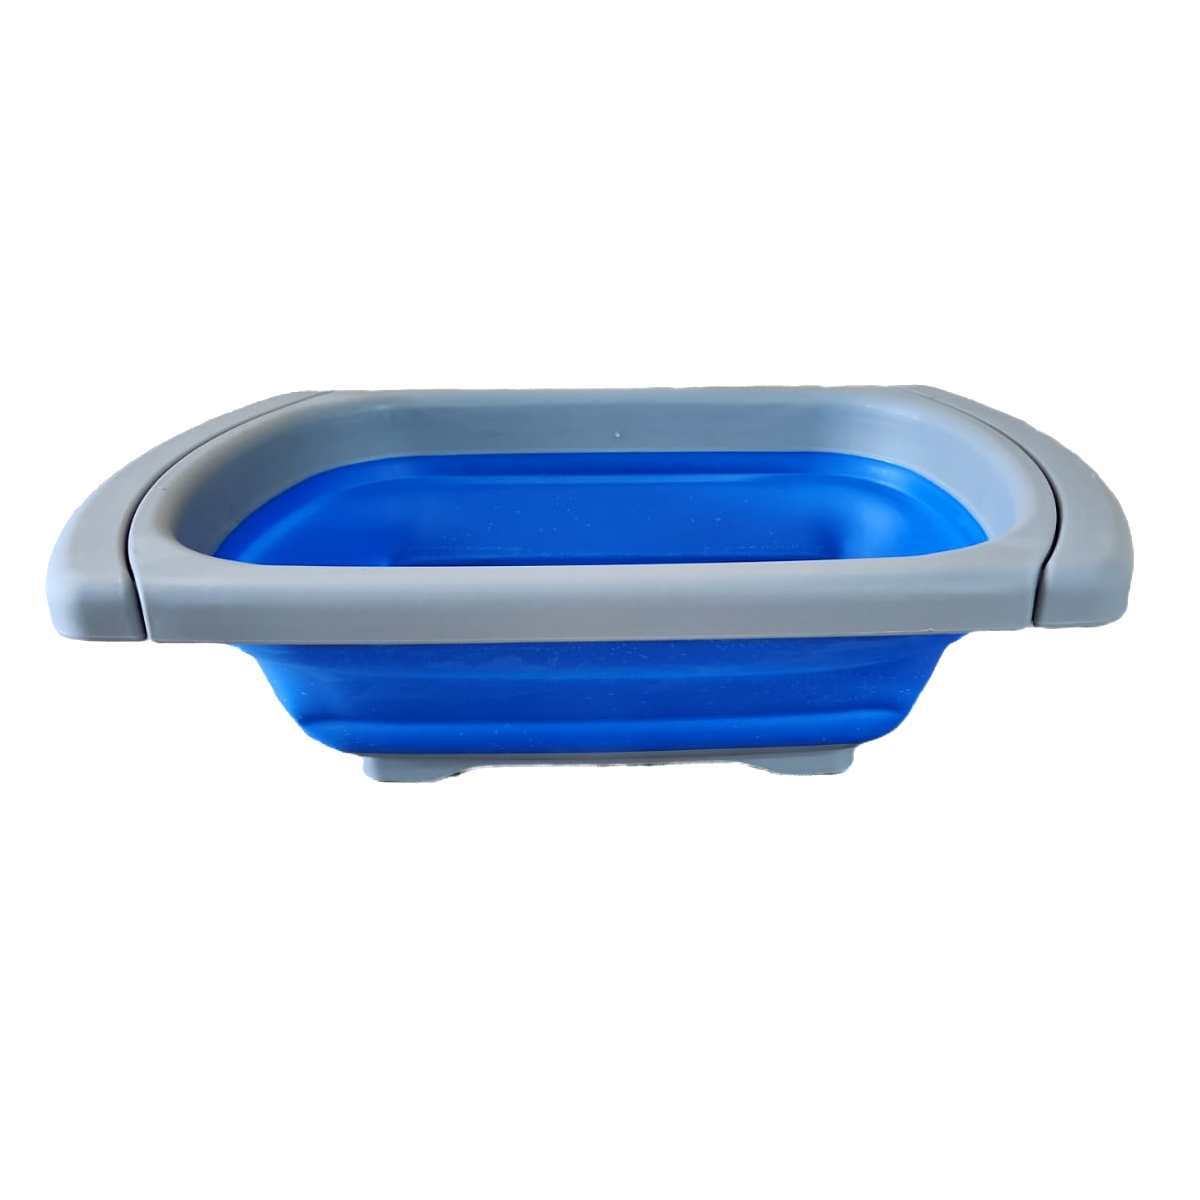 LeisureQuip washing up Bowl with Extendable Arms